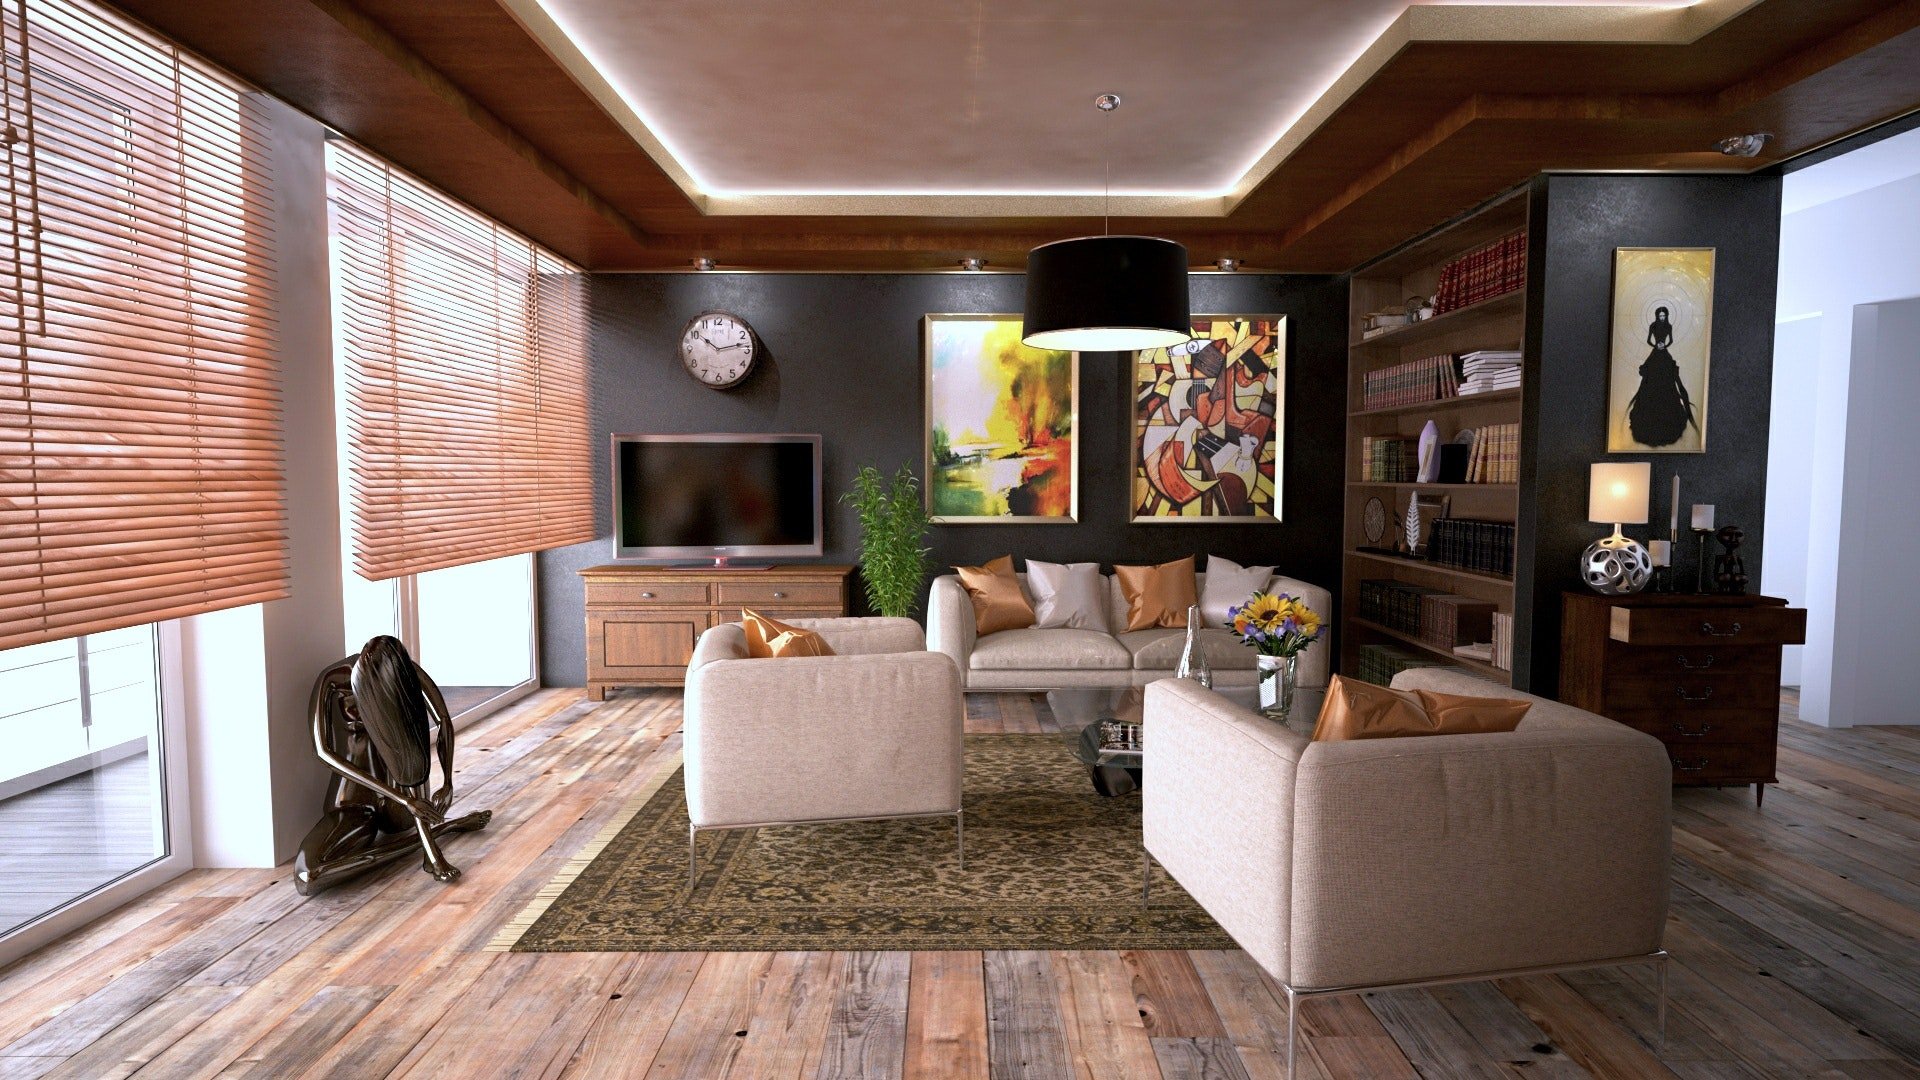 boxy living room copnfiguration with drawn shades